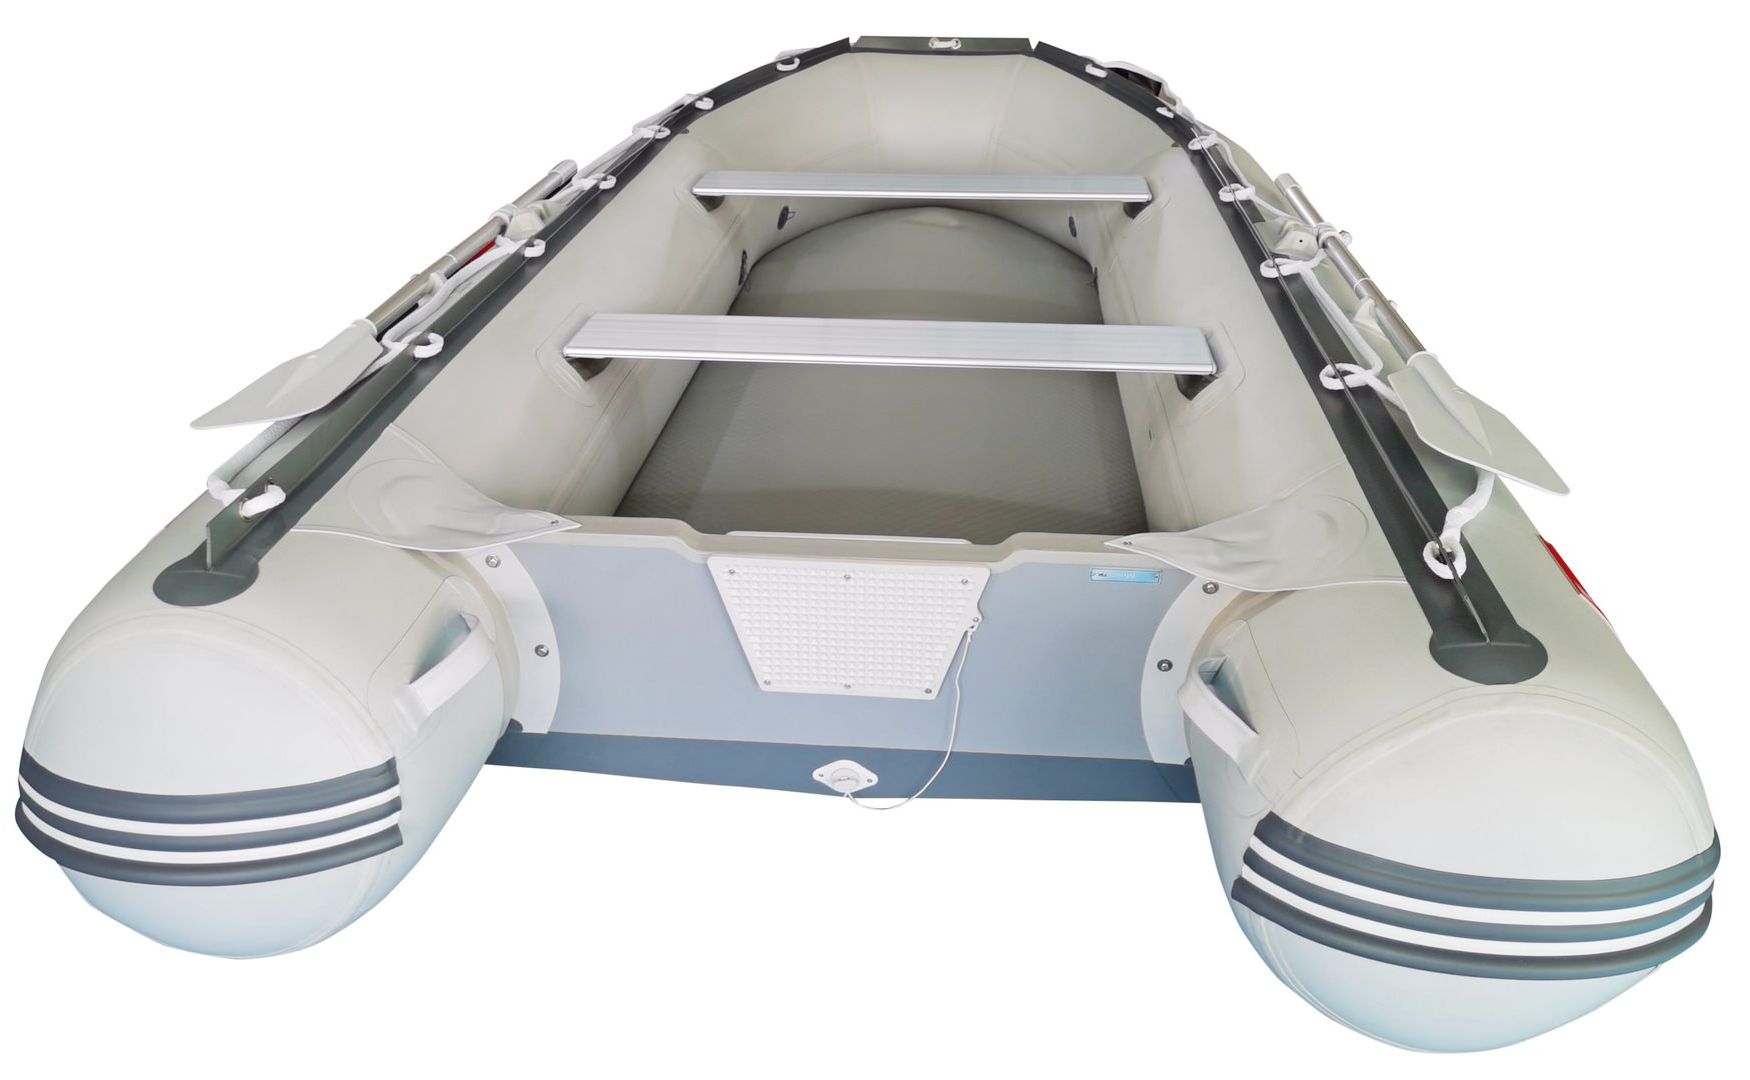 8.6' Mars Inflatable Boat made by Saturn Best Inflatable Boats Rafts & Tenders